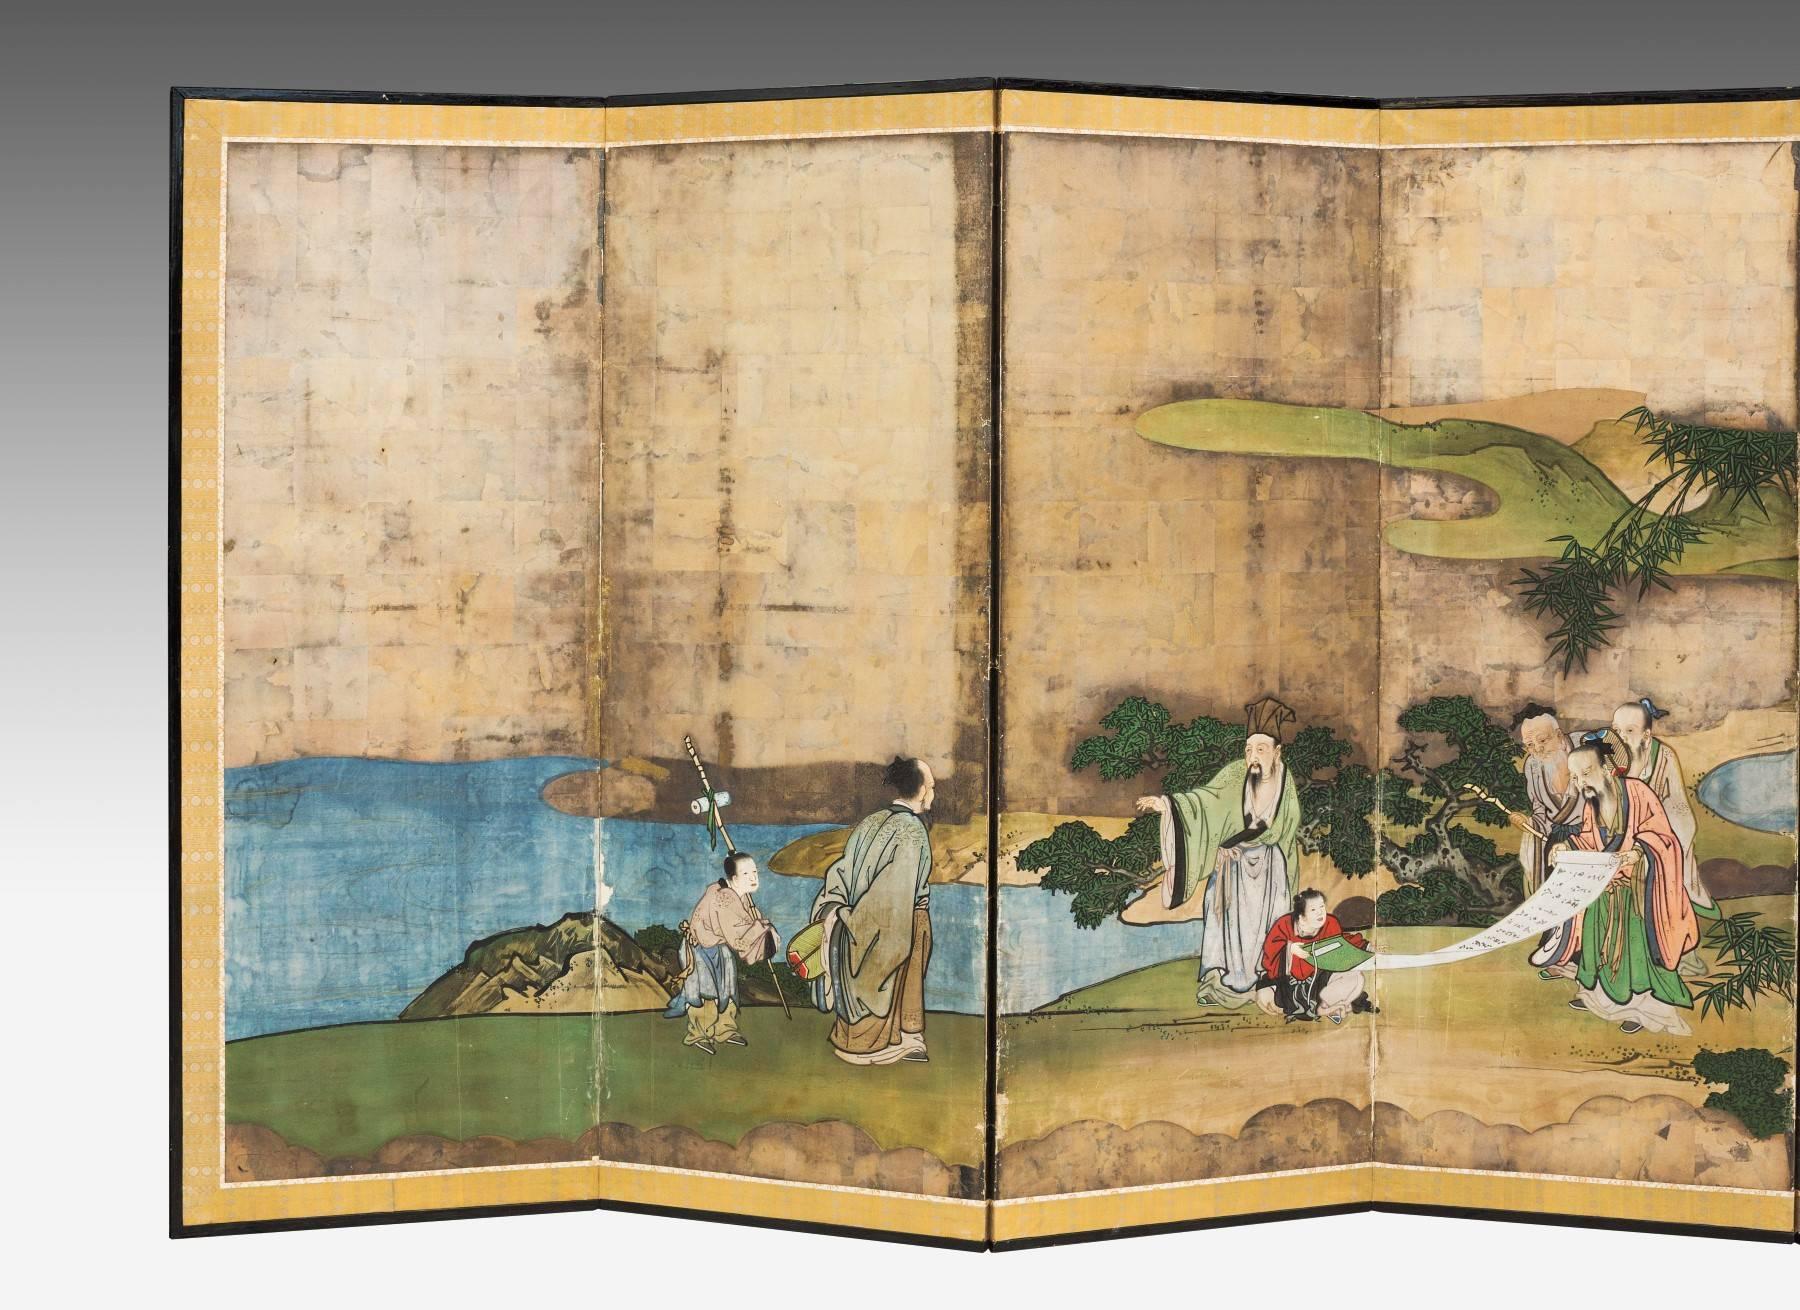 Dating from the first half of the 19th century, this screen illustrates the famous Chinese tale of 